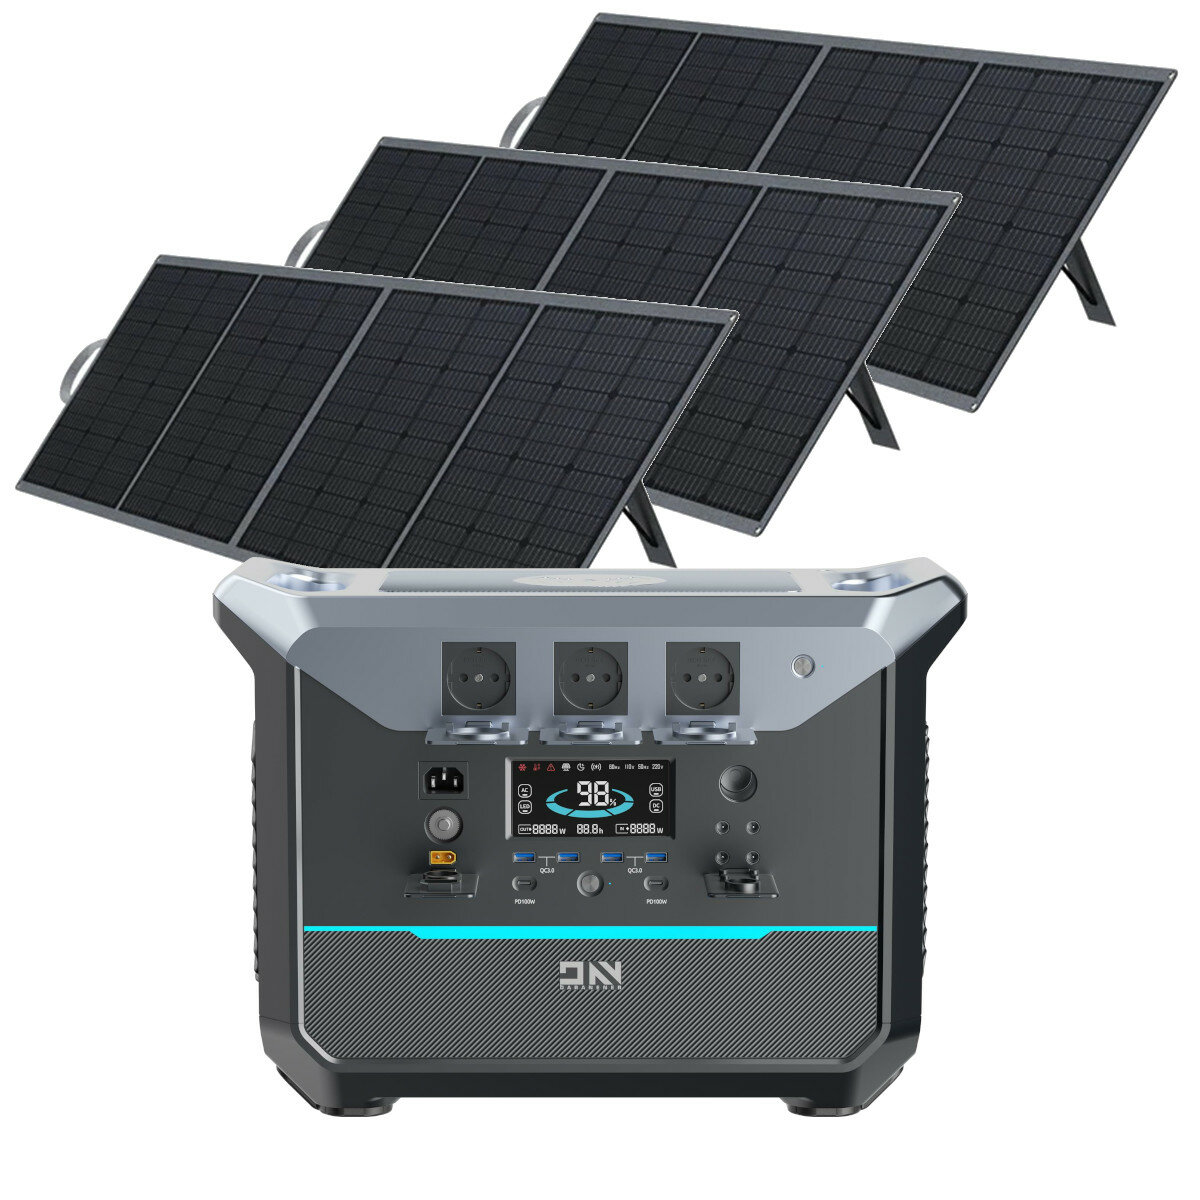 [EU Direct] DaranEner NEO2000 2000W 2073.6Wh LiFePO4 Battery Portable Power Station with 3Pcs SP200 200W ETFE Solar Panel, UPS Power Supply AC Sockets with 1.8 Hours Fast Charging Solar Powered Generator for Home Outdoors Camping Travel RV